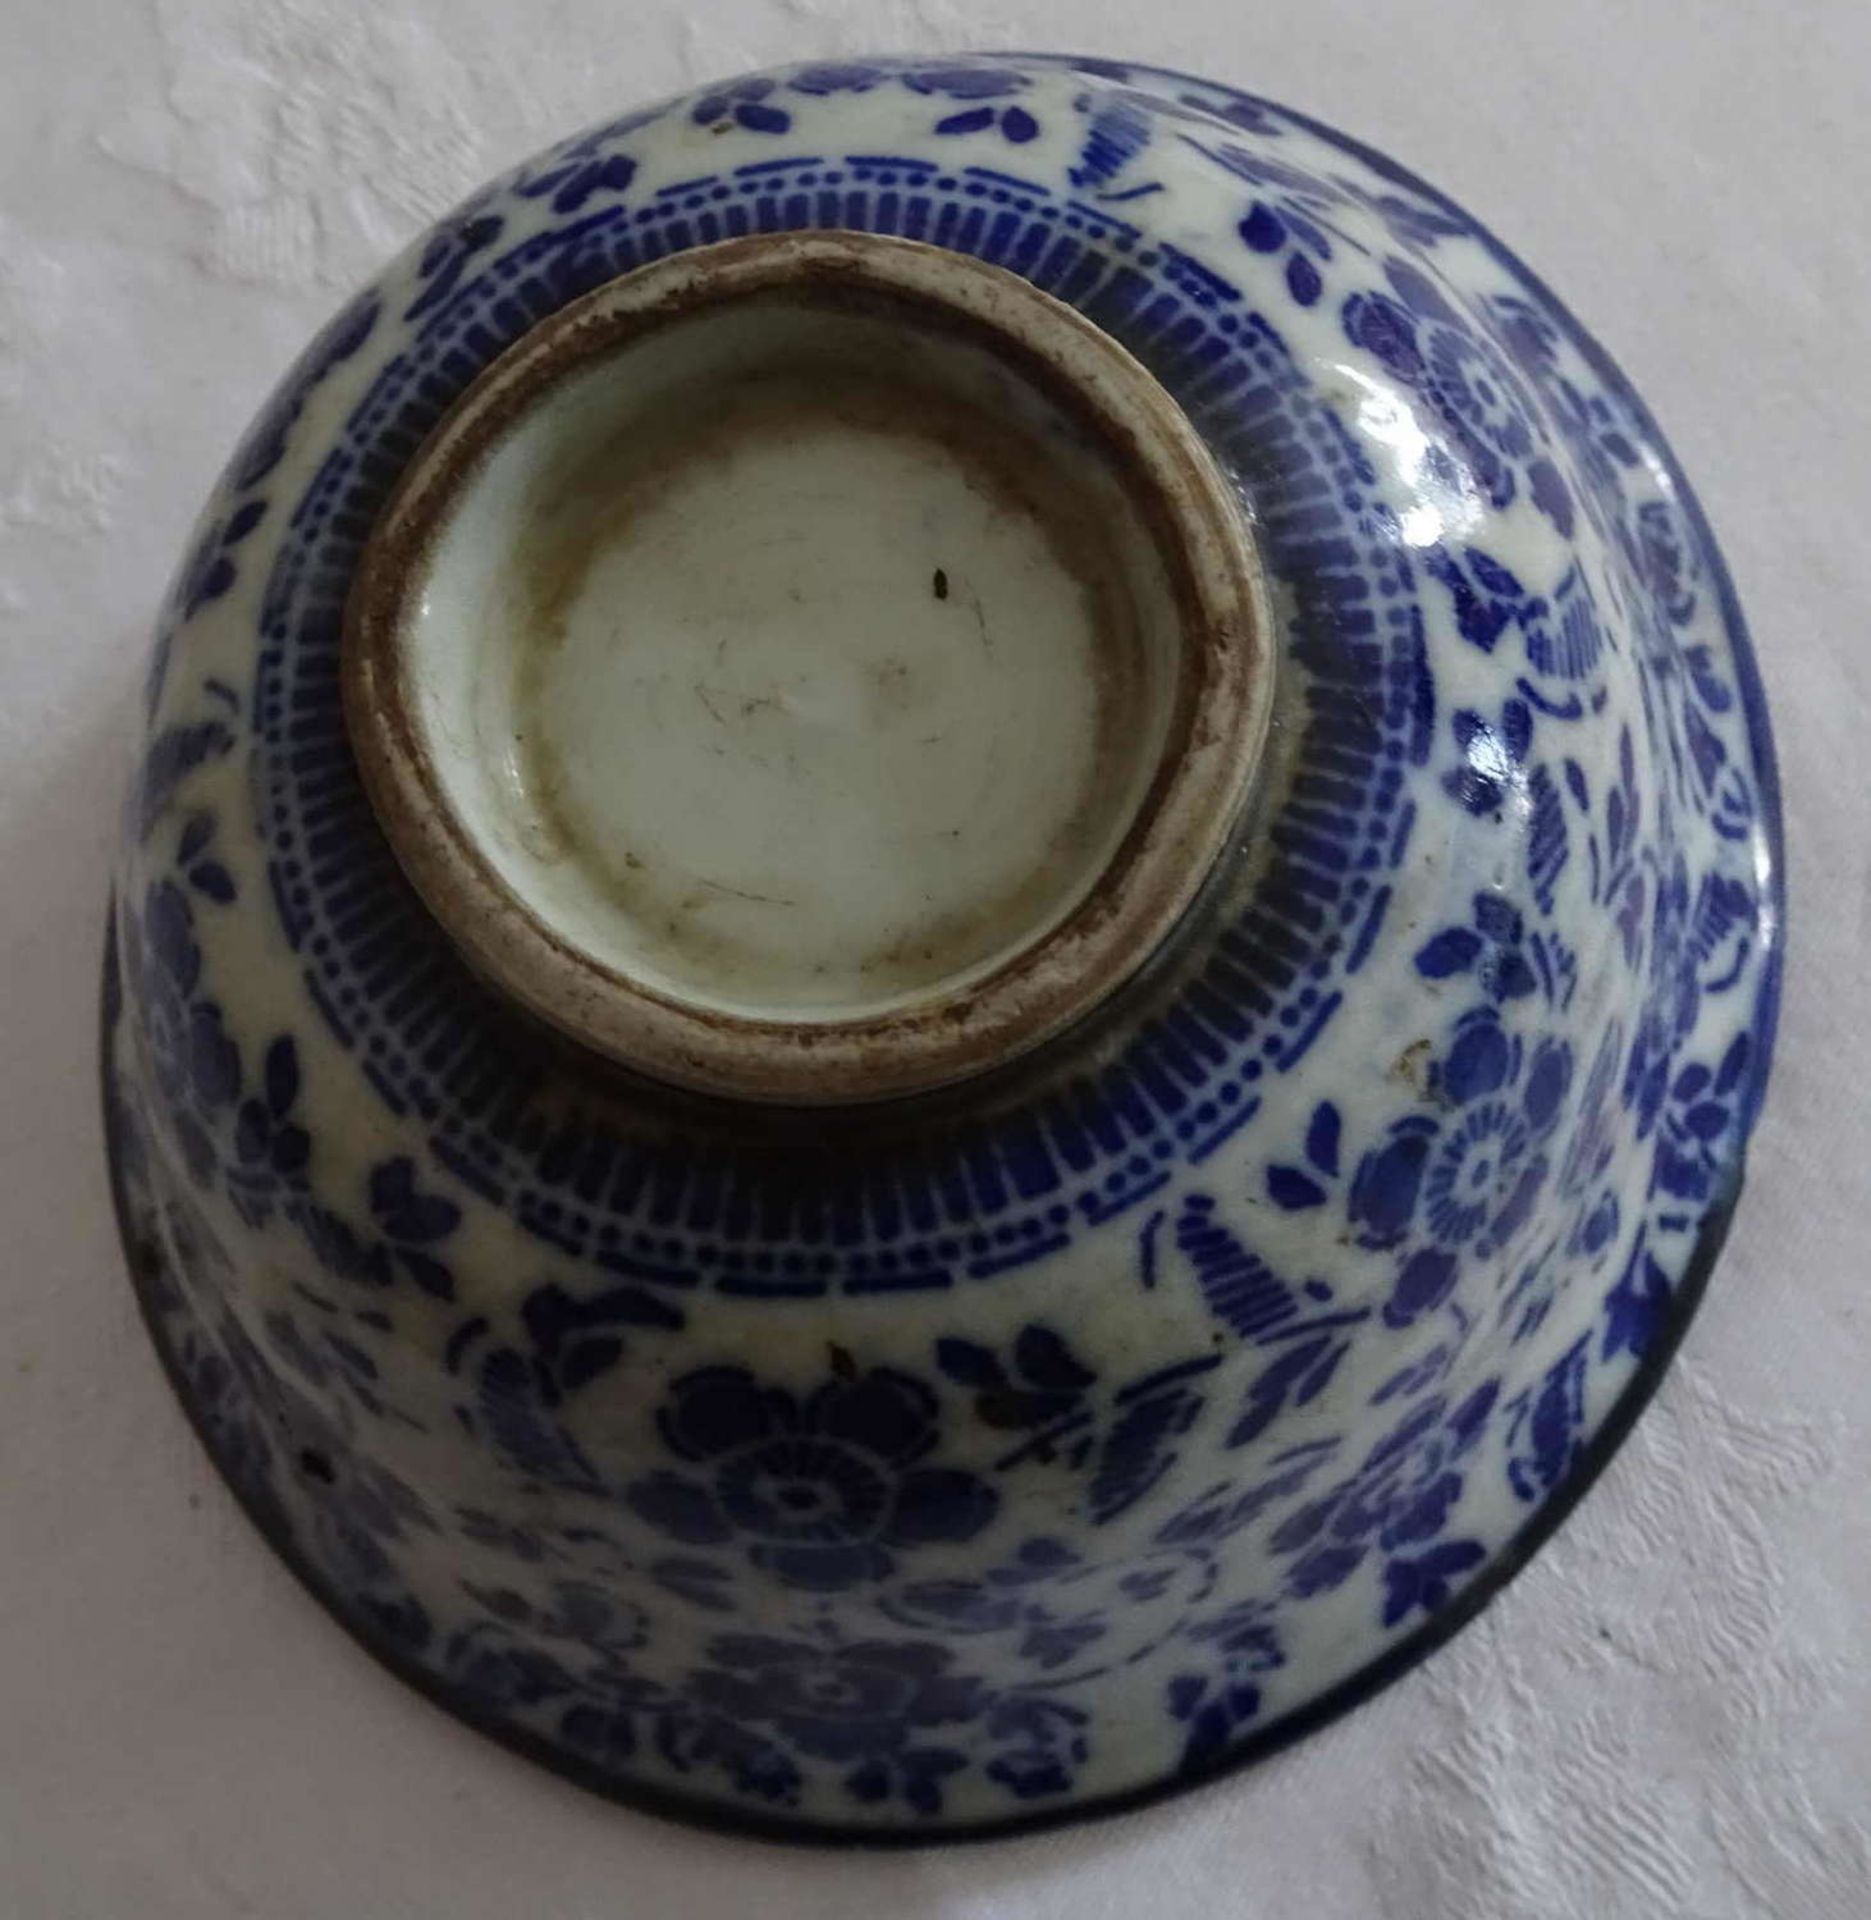 Ming Schale China, Durchmesser ca. 13,5 cm, mit Chip.Ming bowl China, diameter approx. 13.5 cm, with - Image 2 of 2